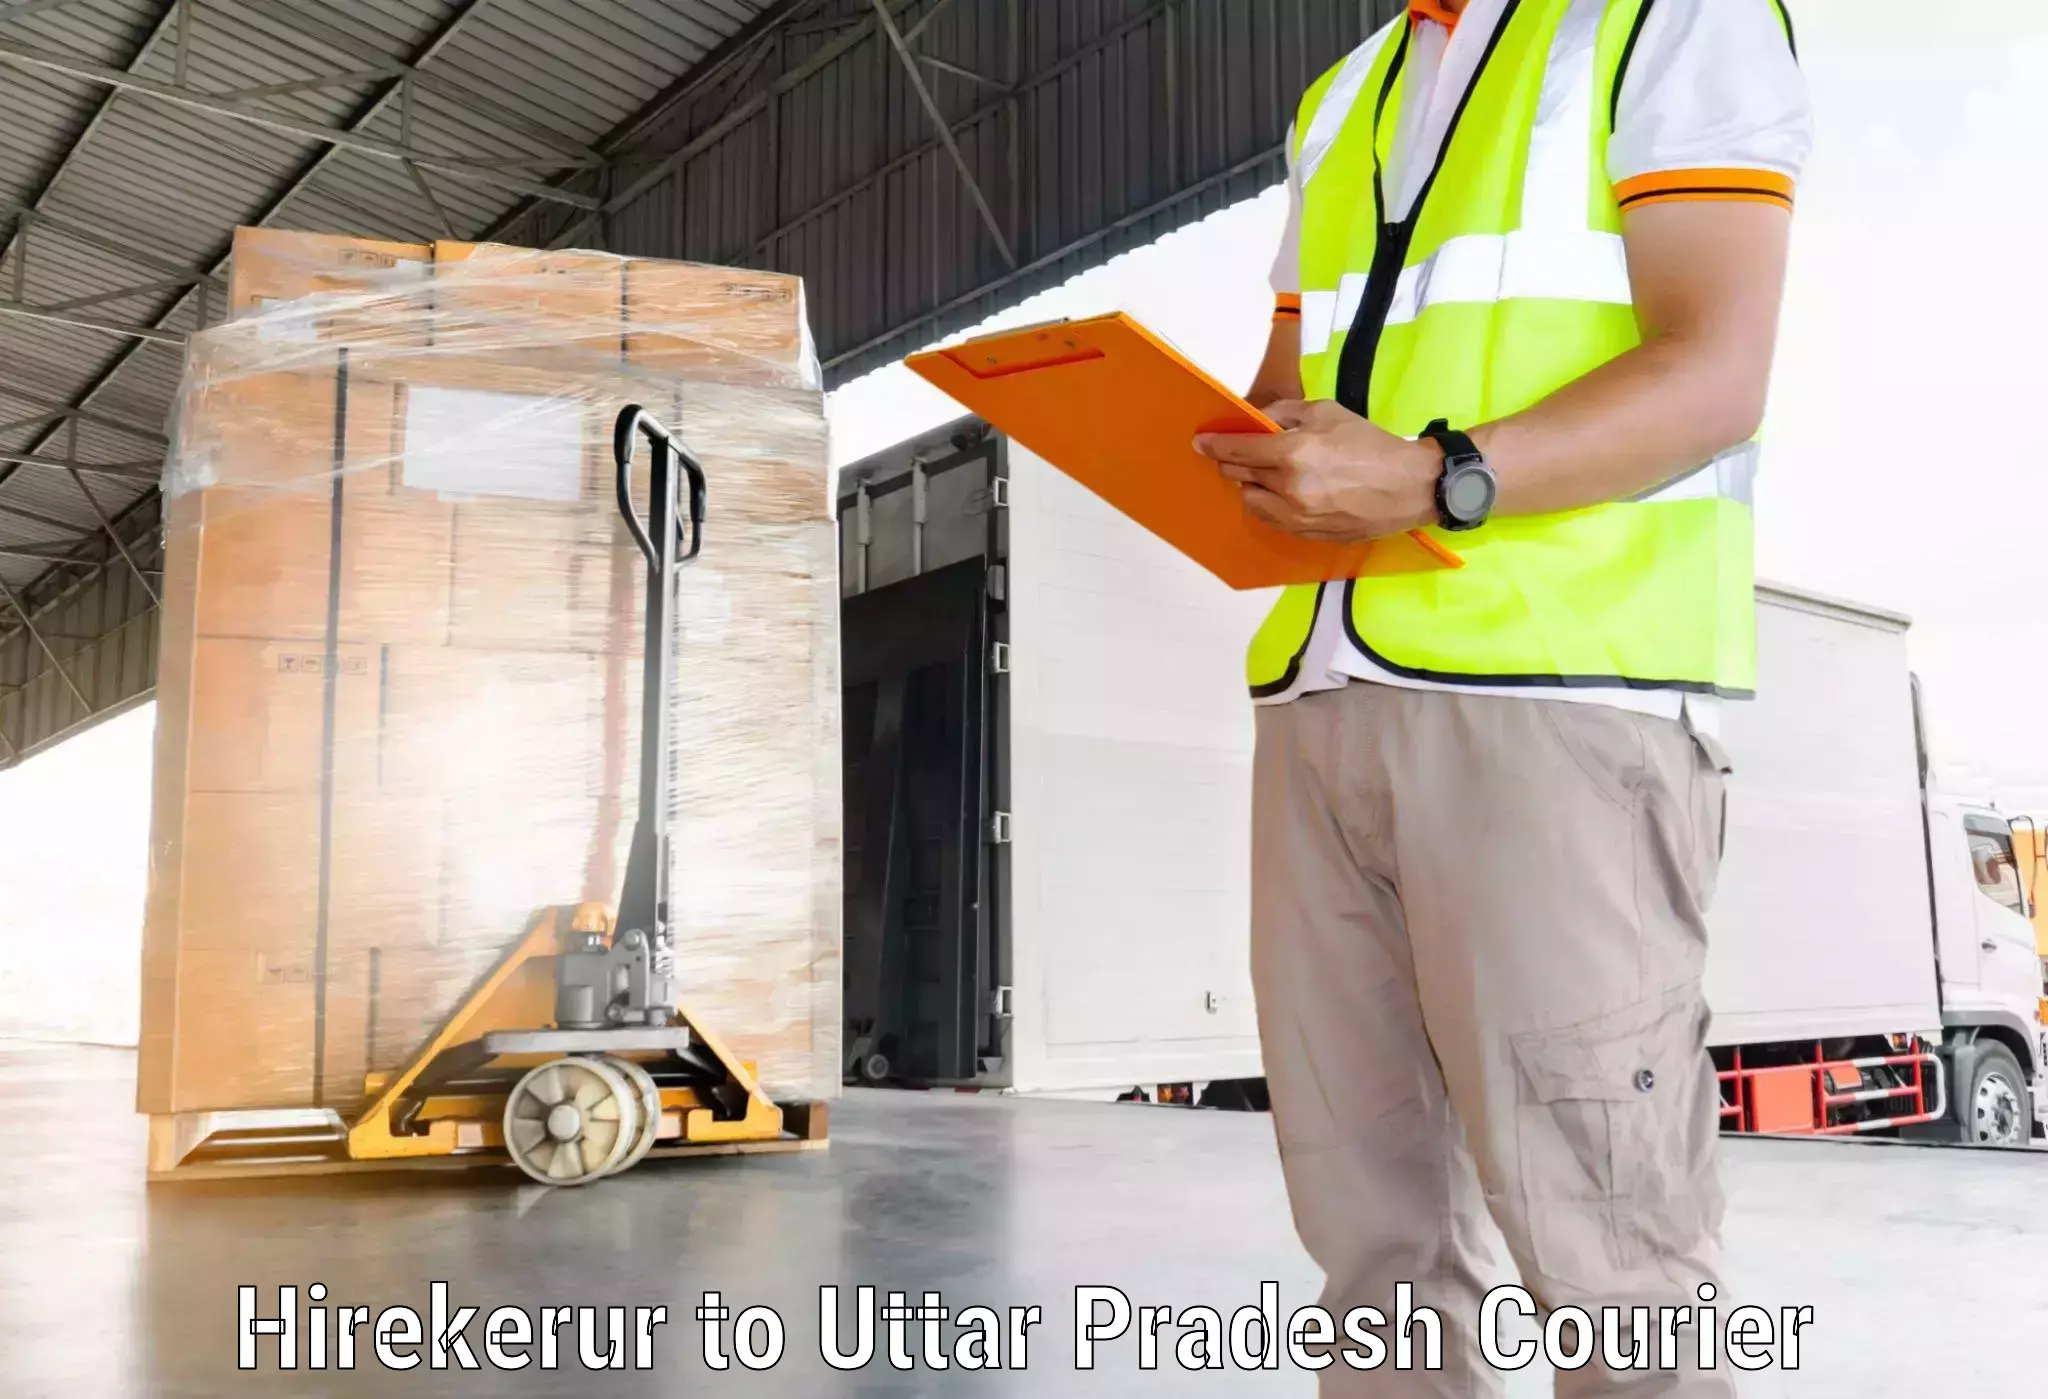 On-call courier service Hirekerur to Basti